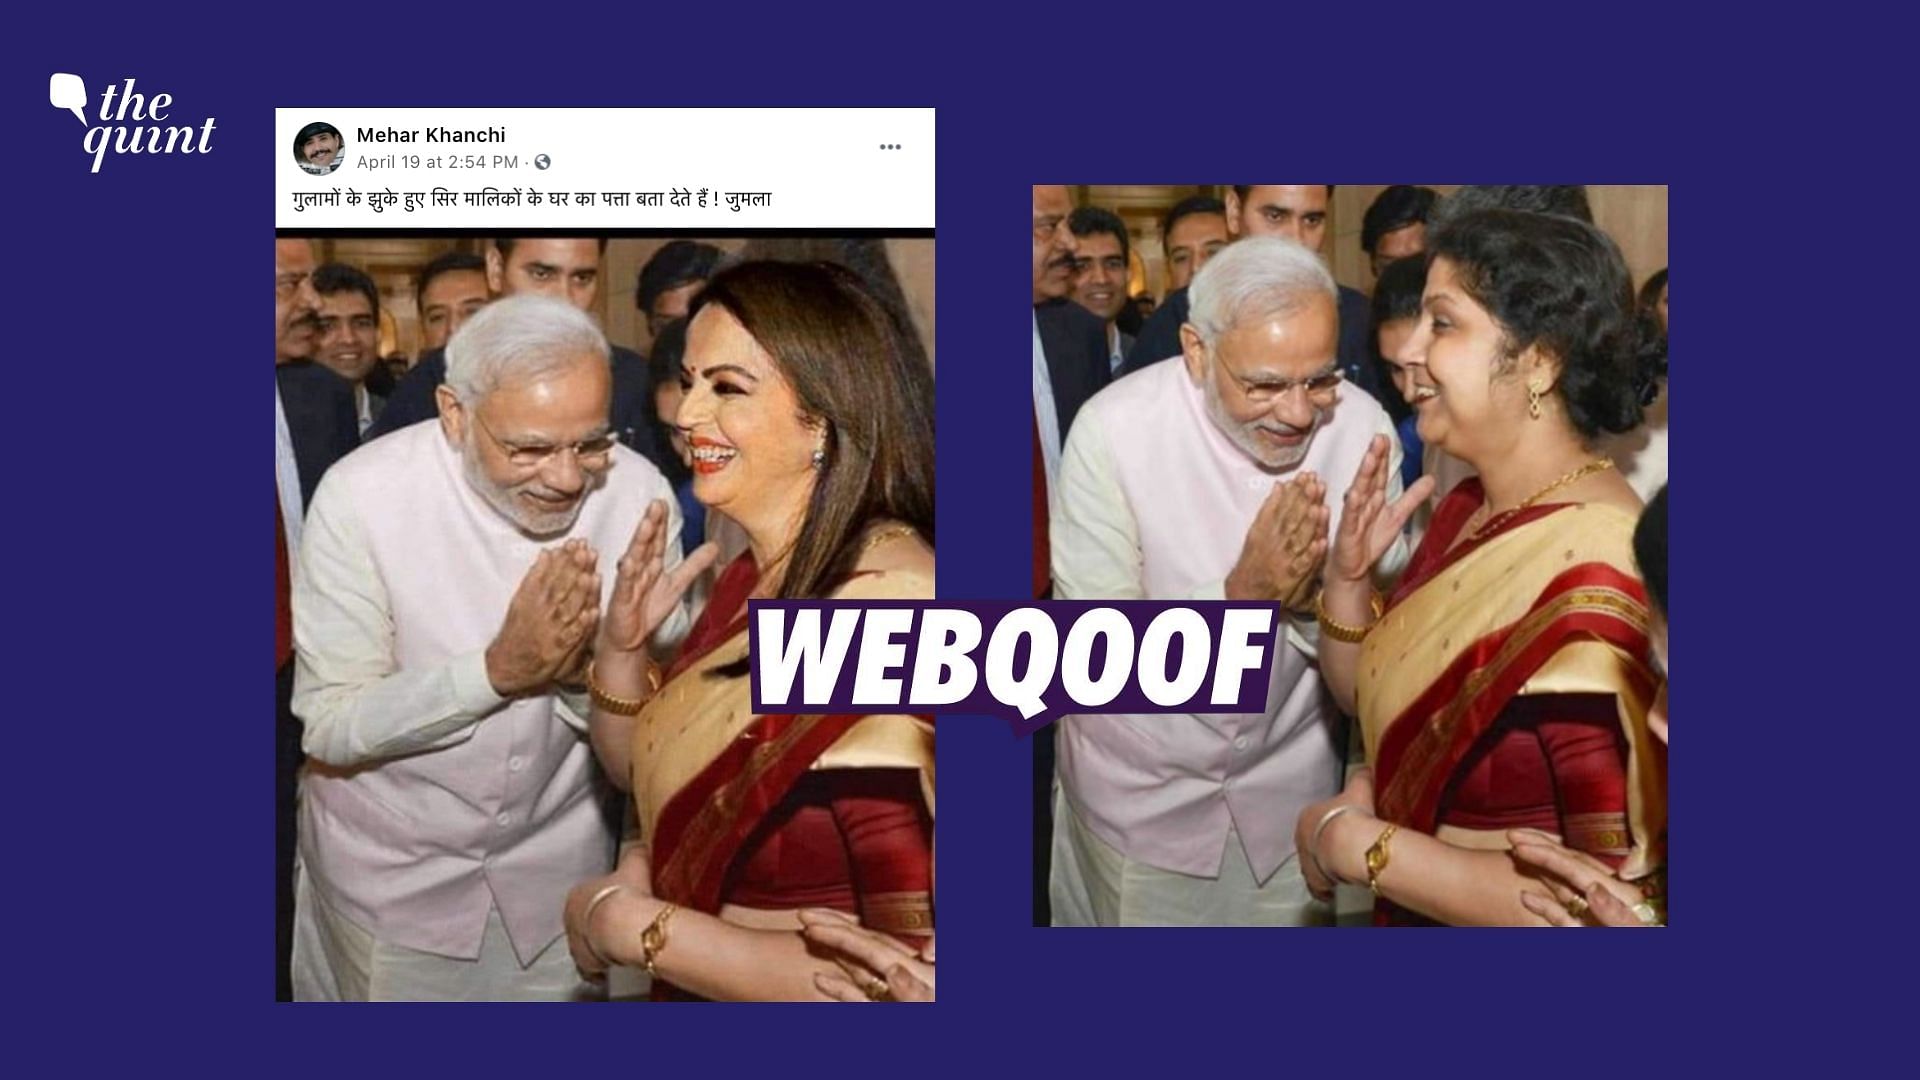 An image of Prime Minister <a href="https://www.thequint.com/topic/prime-minister-narendra-modi">Narendra Modi</a> greeting a woman has been morphed to falsely show that he was greeting Reliance’s Nita Ambani.